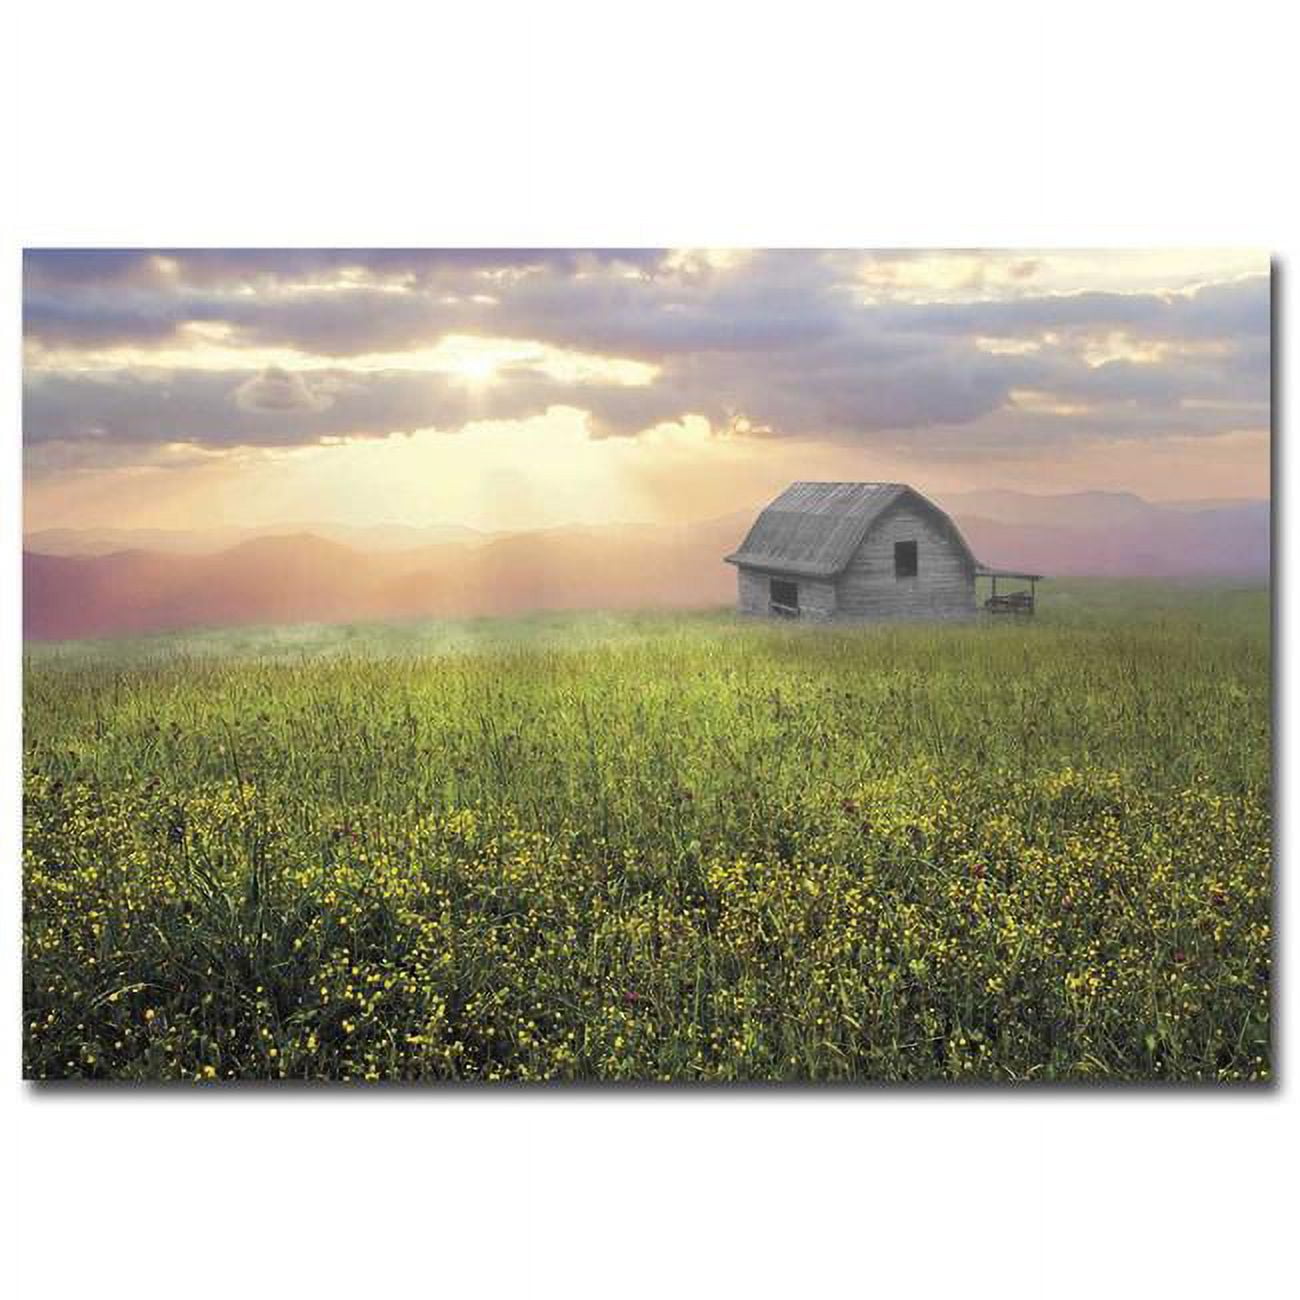 1218i795cg Morning Has Broken By Celebrate Life Gallery Premium Gallery-wrapped Canvas Giclee Panorama Art - 12 X 18 X 1.5 In.